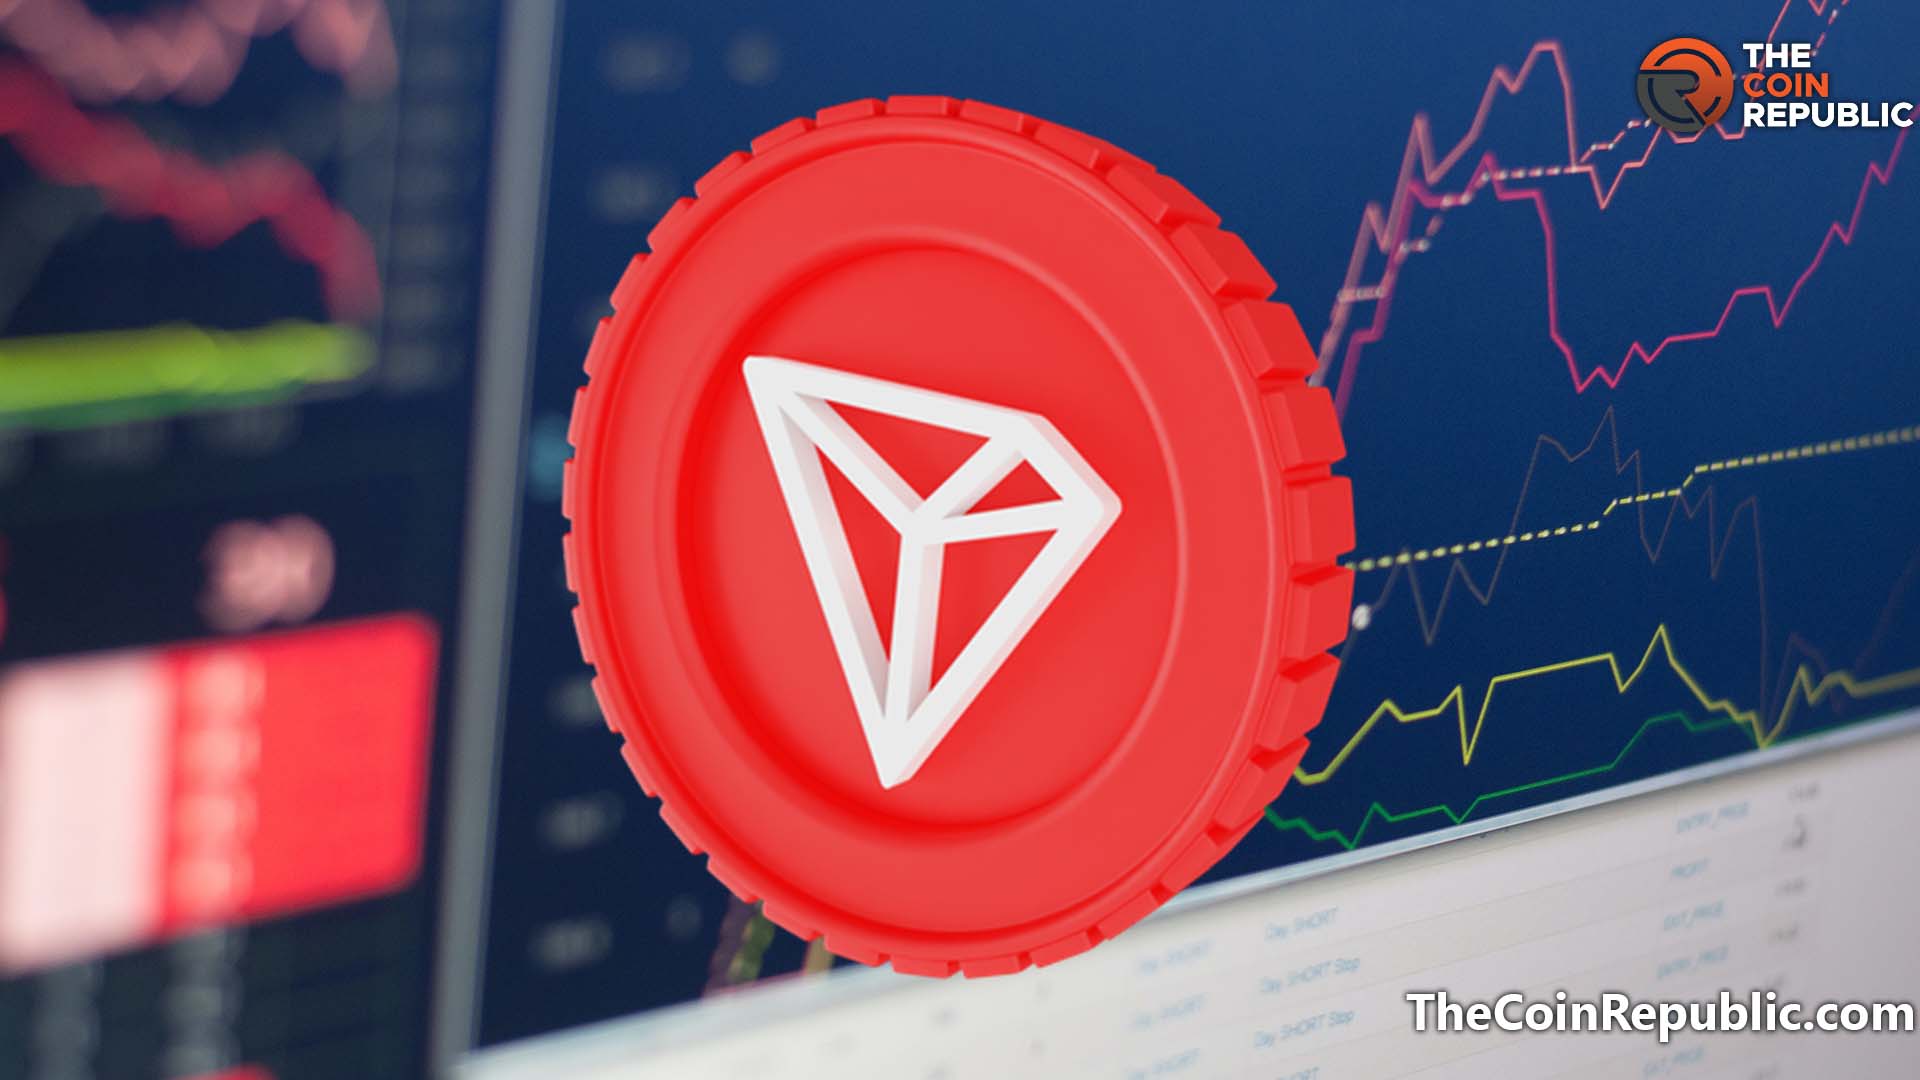 TRX Price Analysis: TRON Price action leaves much to be desired from bulls